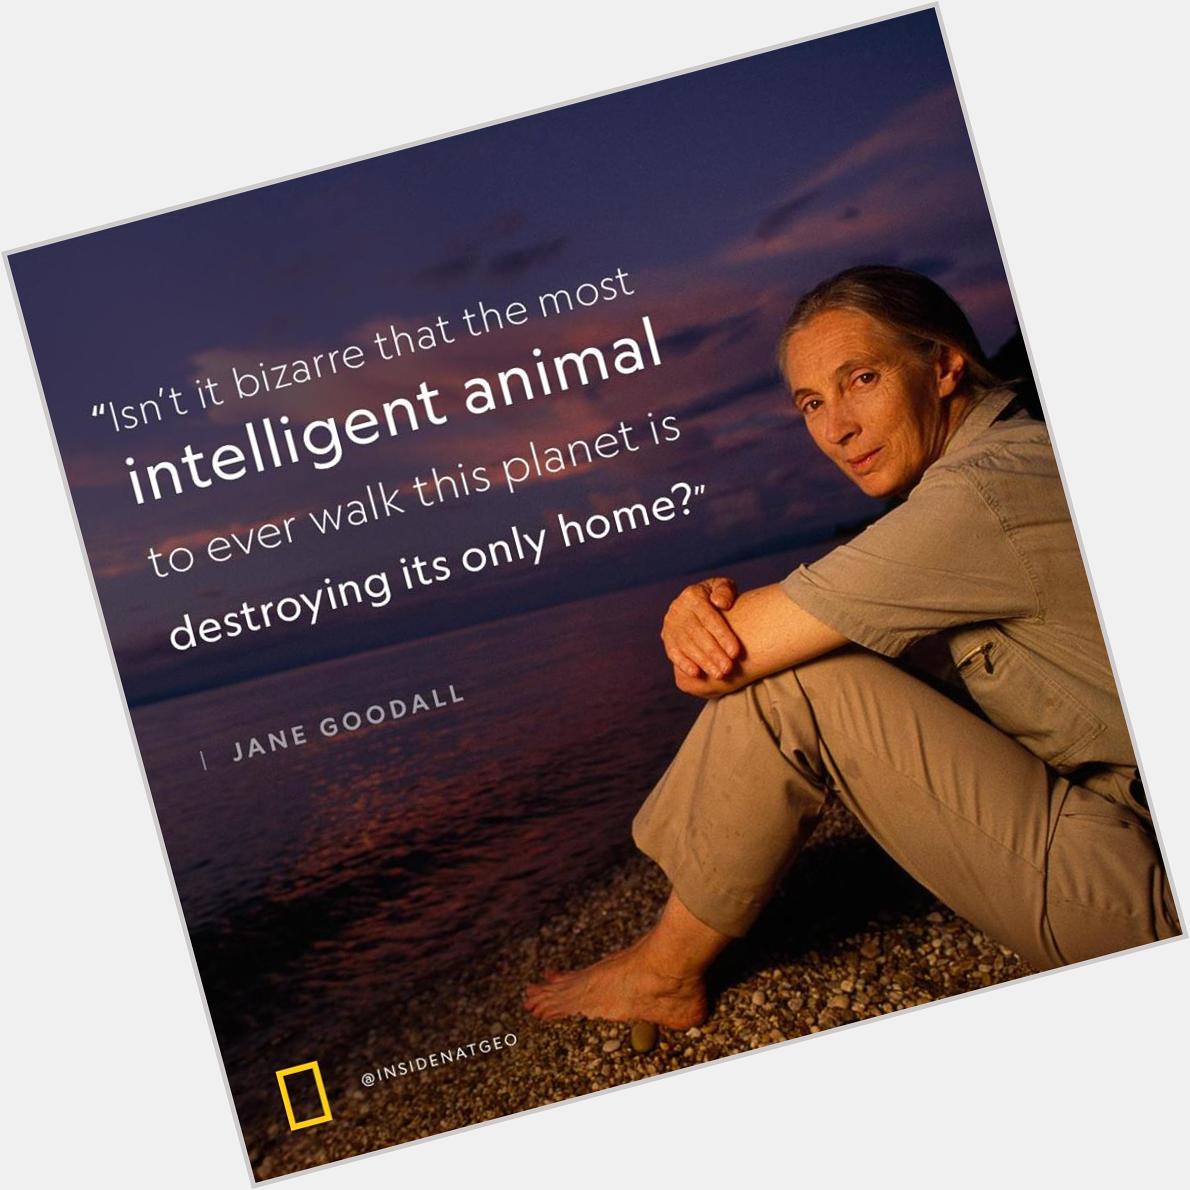 Happy birthday to Jane Goodall! Thanks to for this thought-provoking quotation from her. 